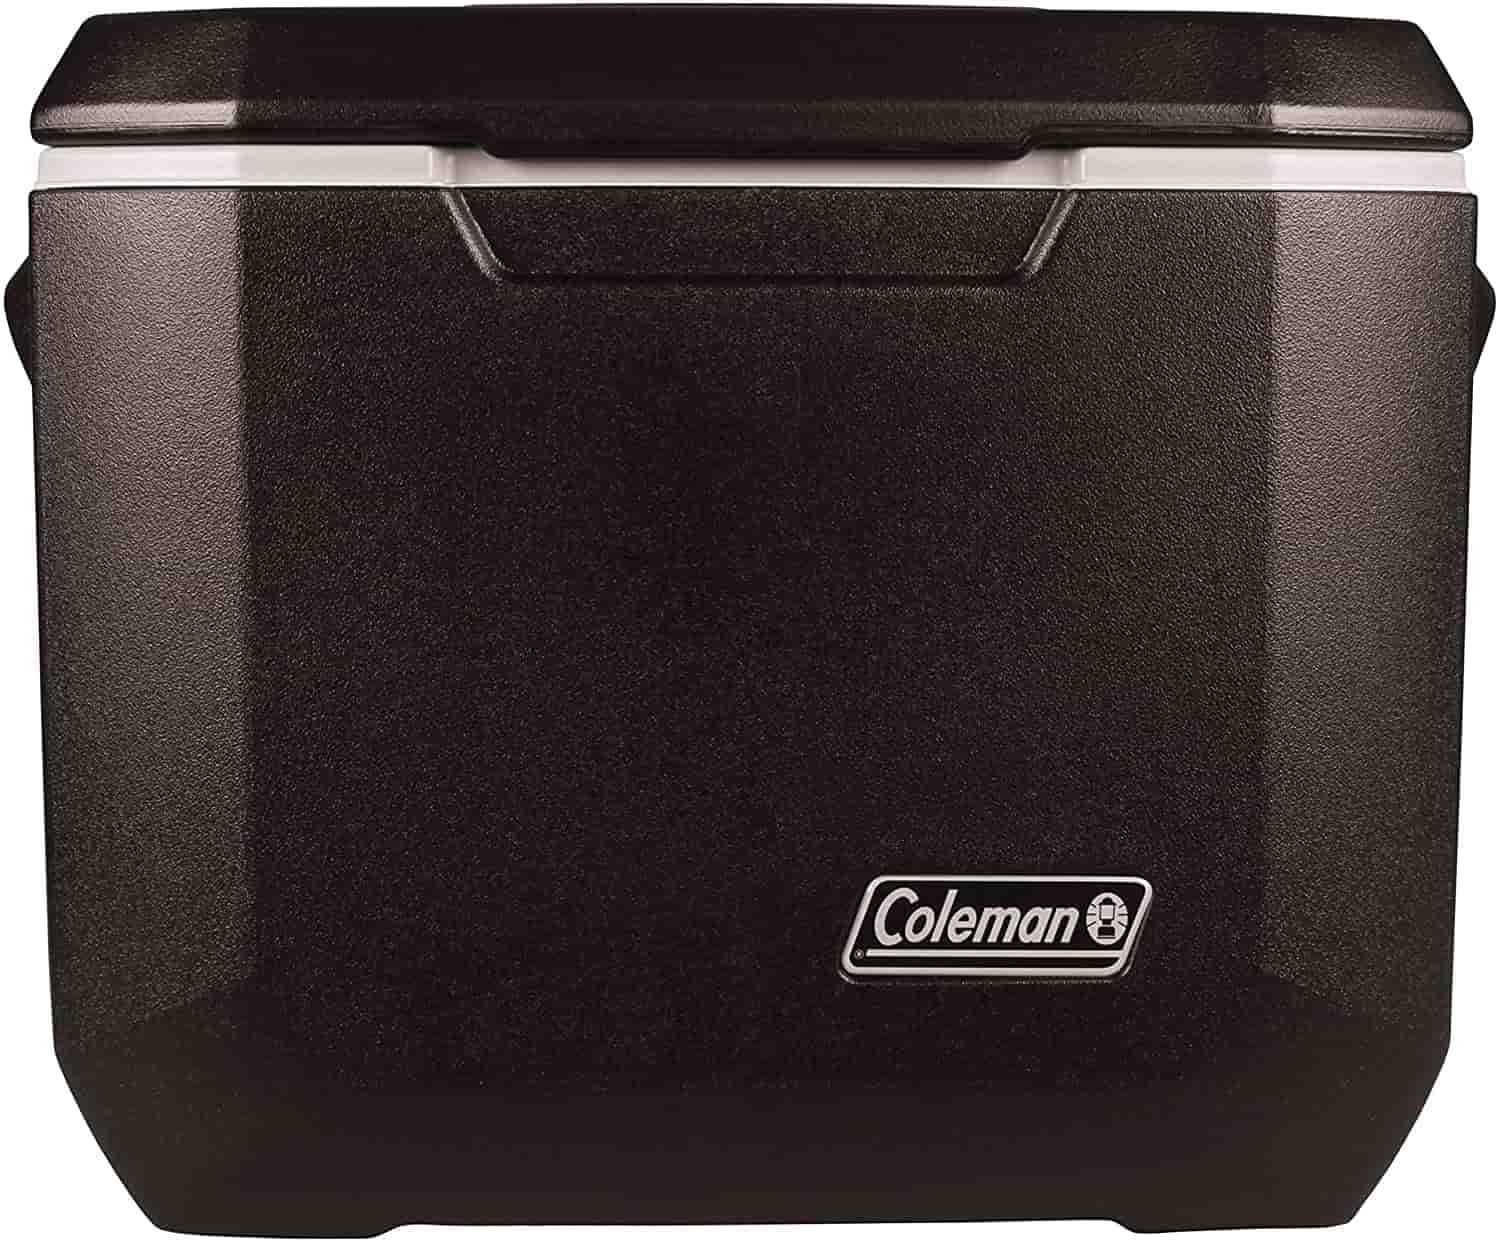 Coleman Rolling Cooler Keeps Ice Up to 5 Days